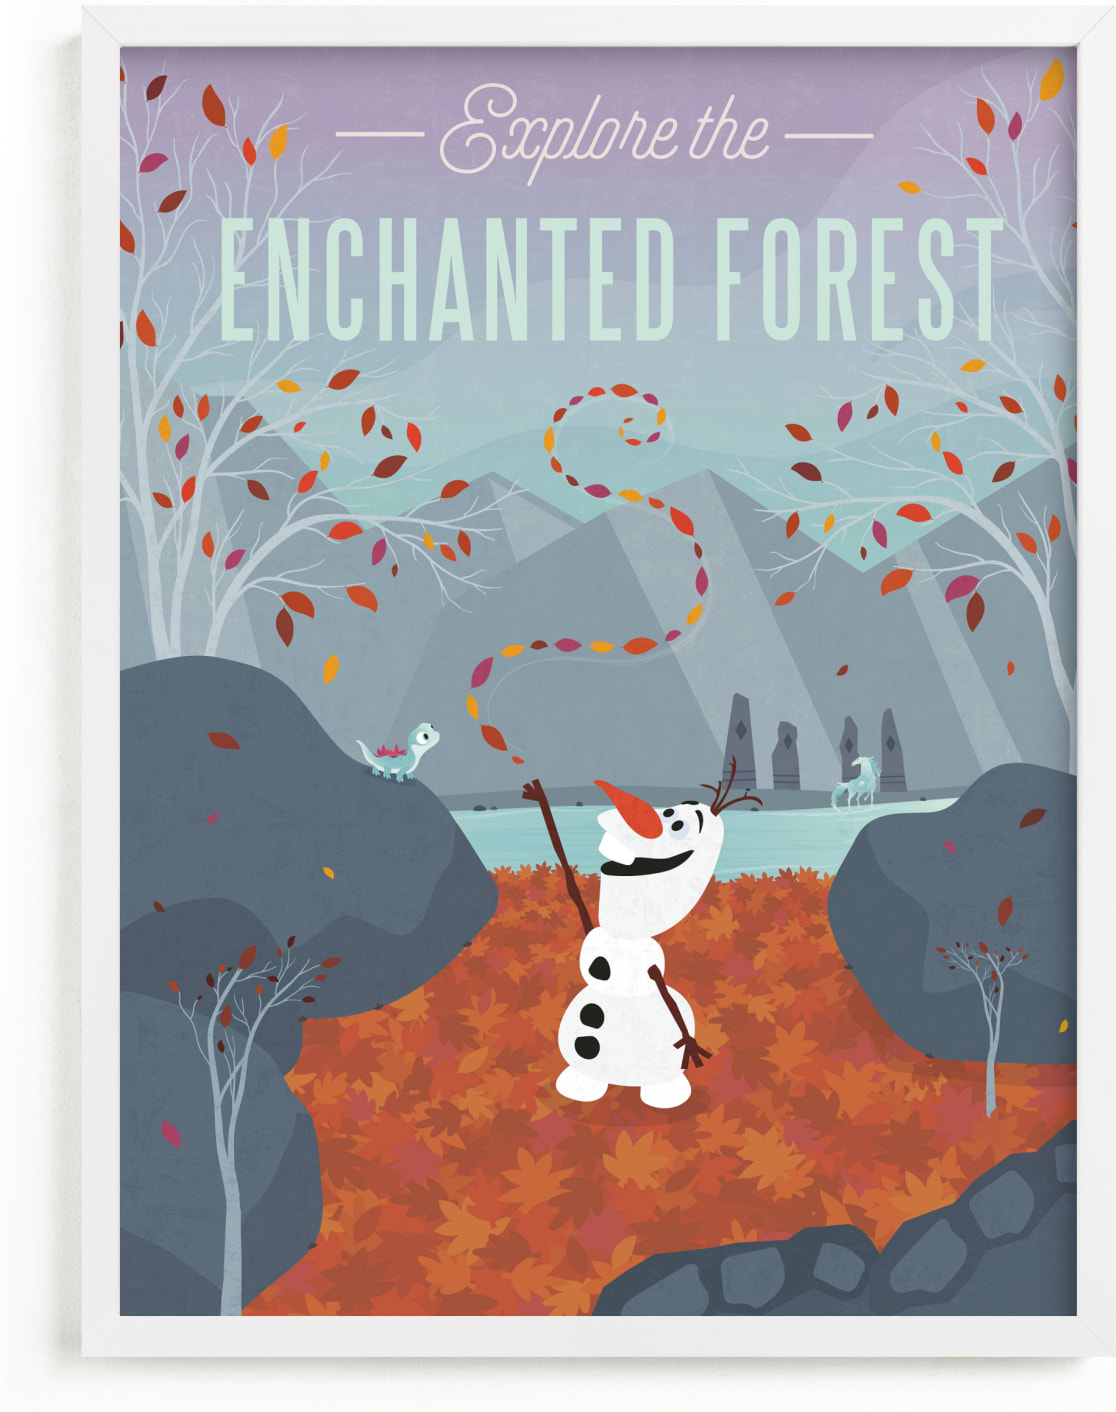 This is a blue disney art by Erica Krystek called Explore the Enchanted Forest from Disney's Frozen.